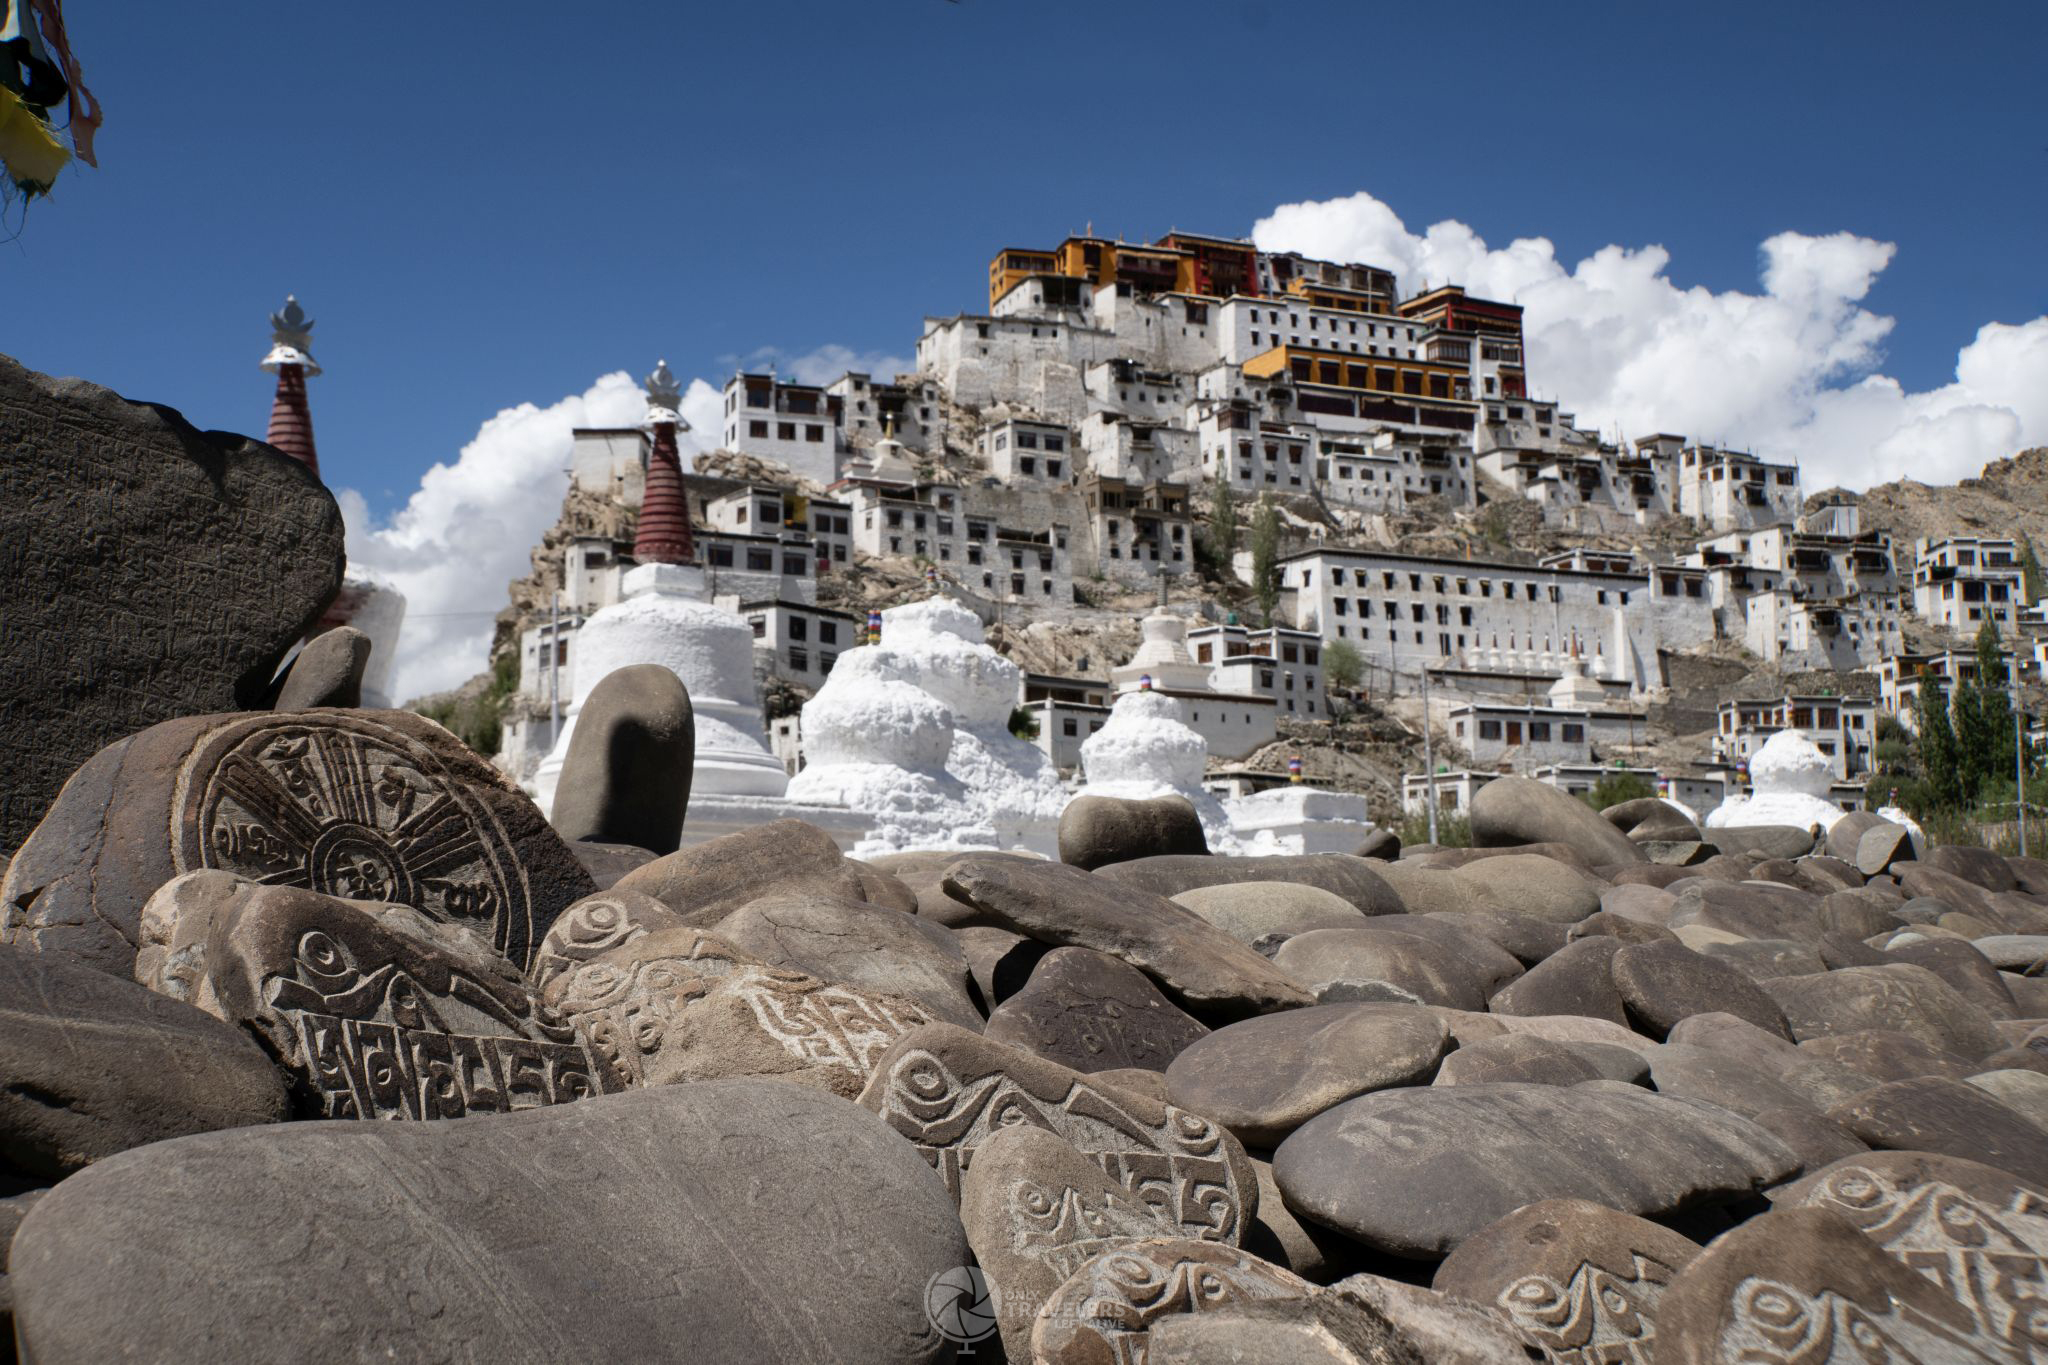 ladakh by only travelers left alive